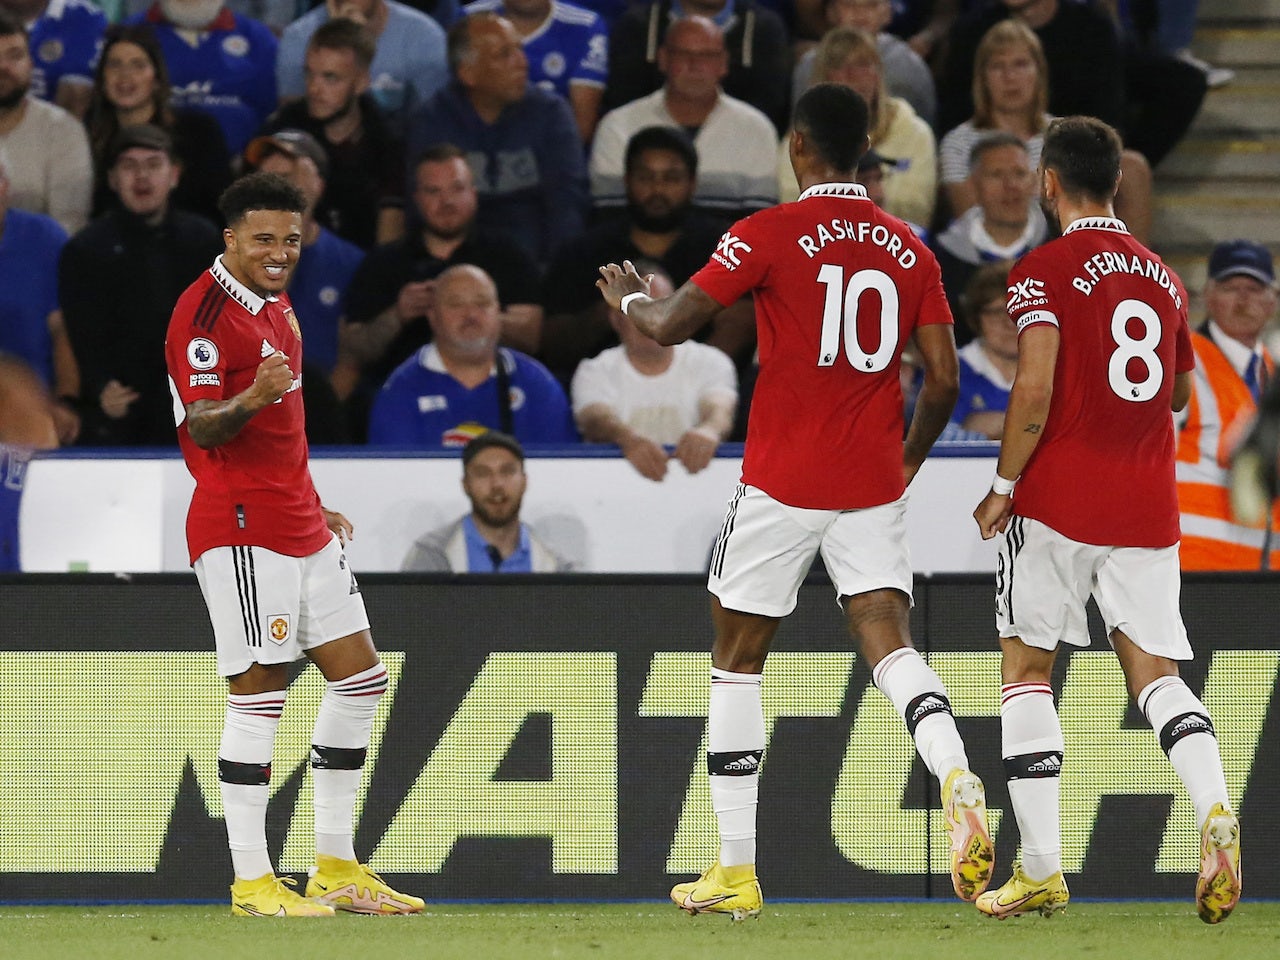 Result: Jadon Sancho fires Manchester United to victory over rock-bottom Leicester